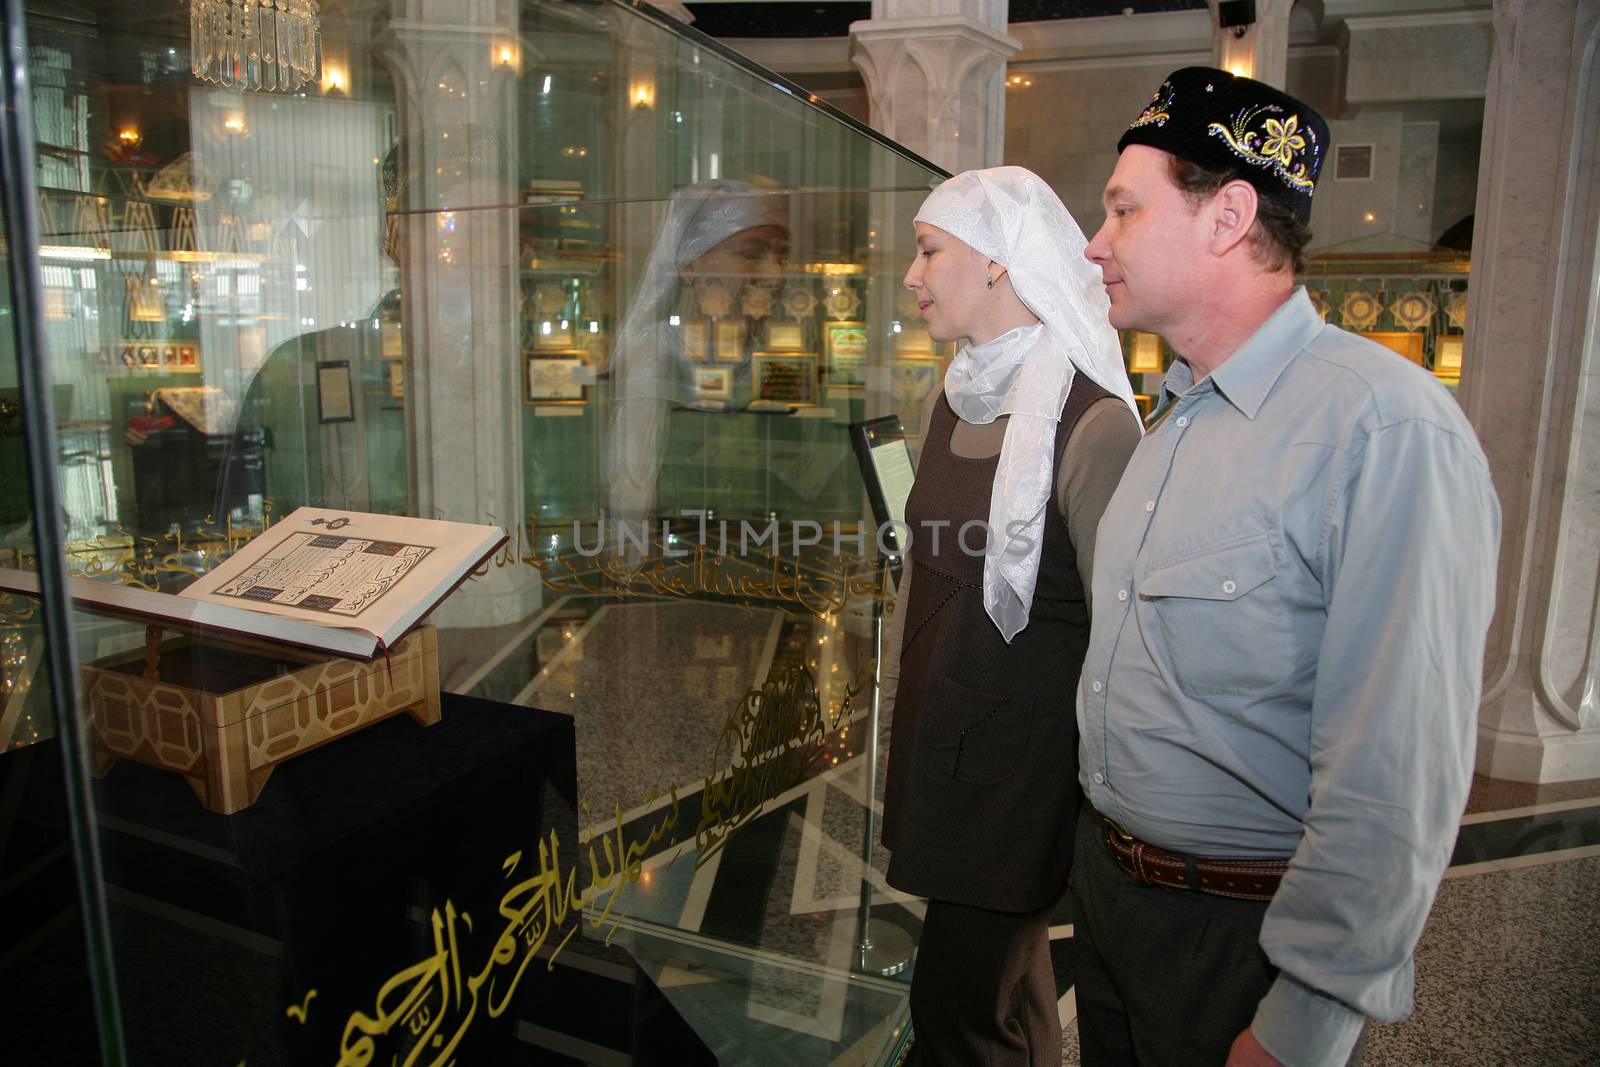 muslim couple walks the islamic museum in the mosque.